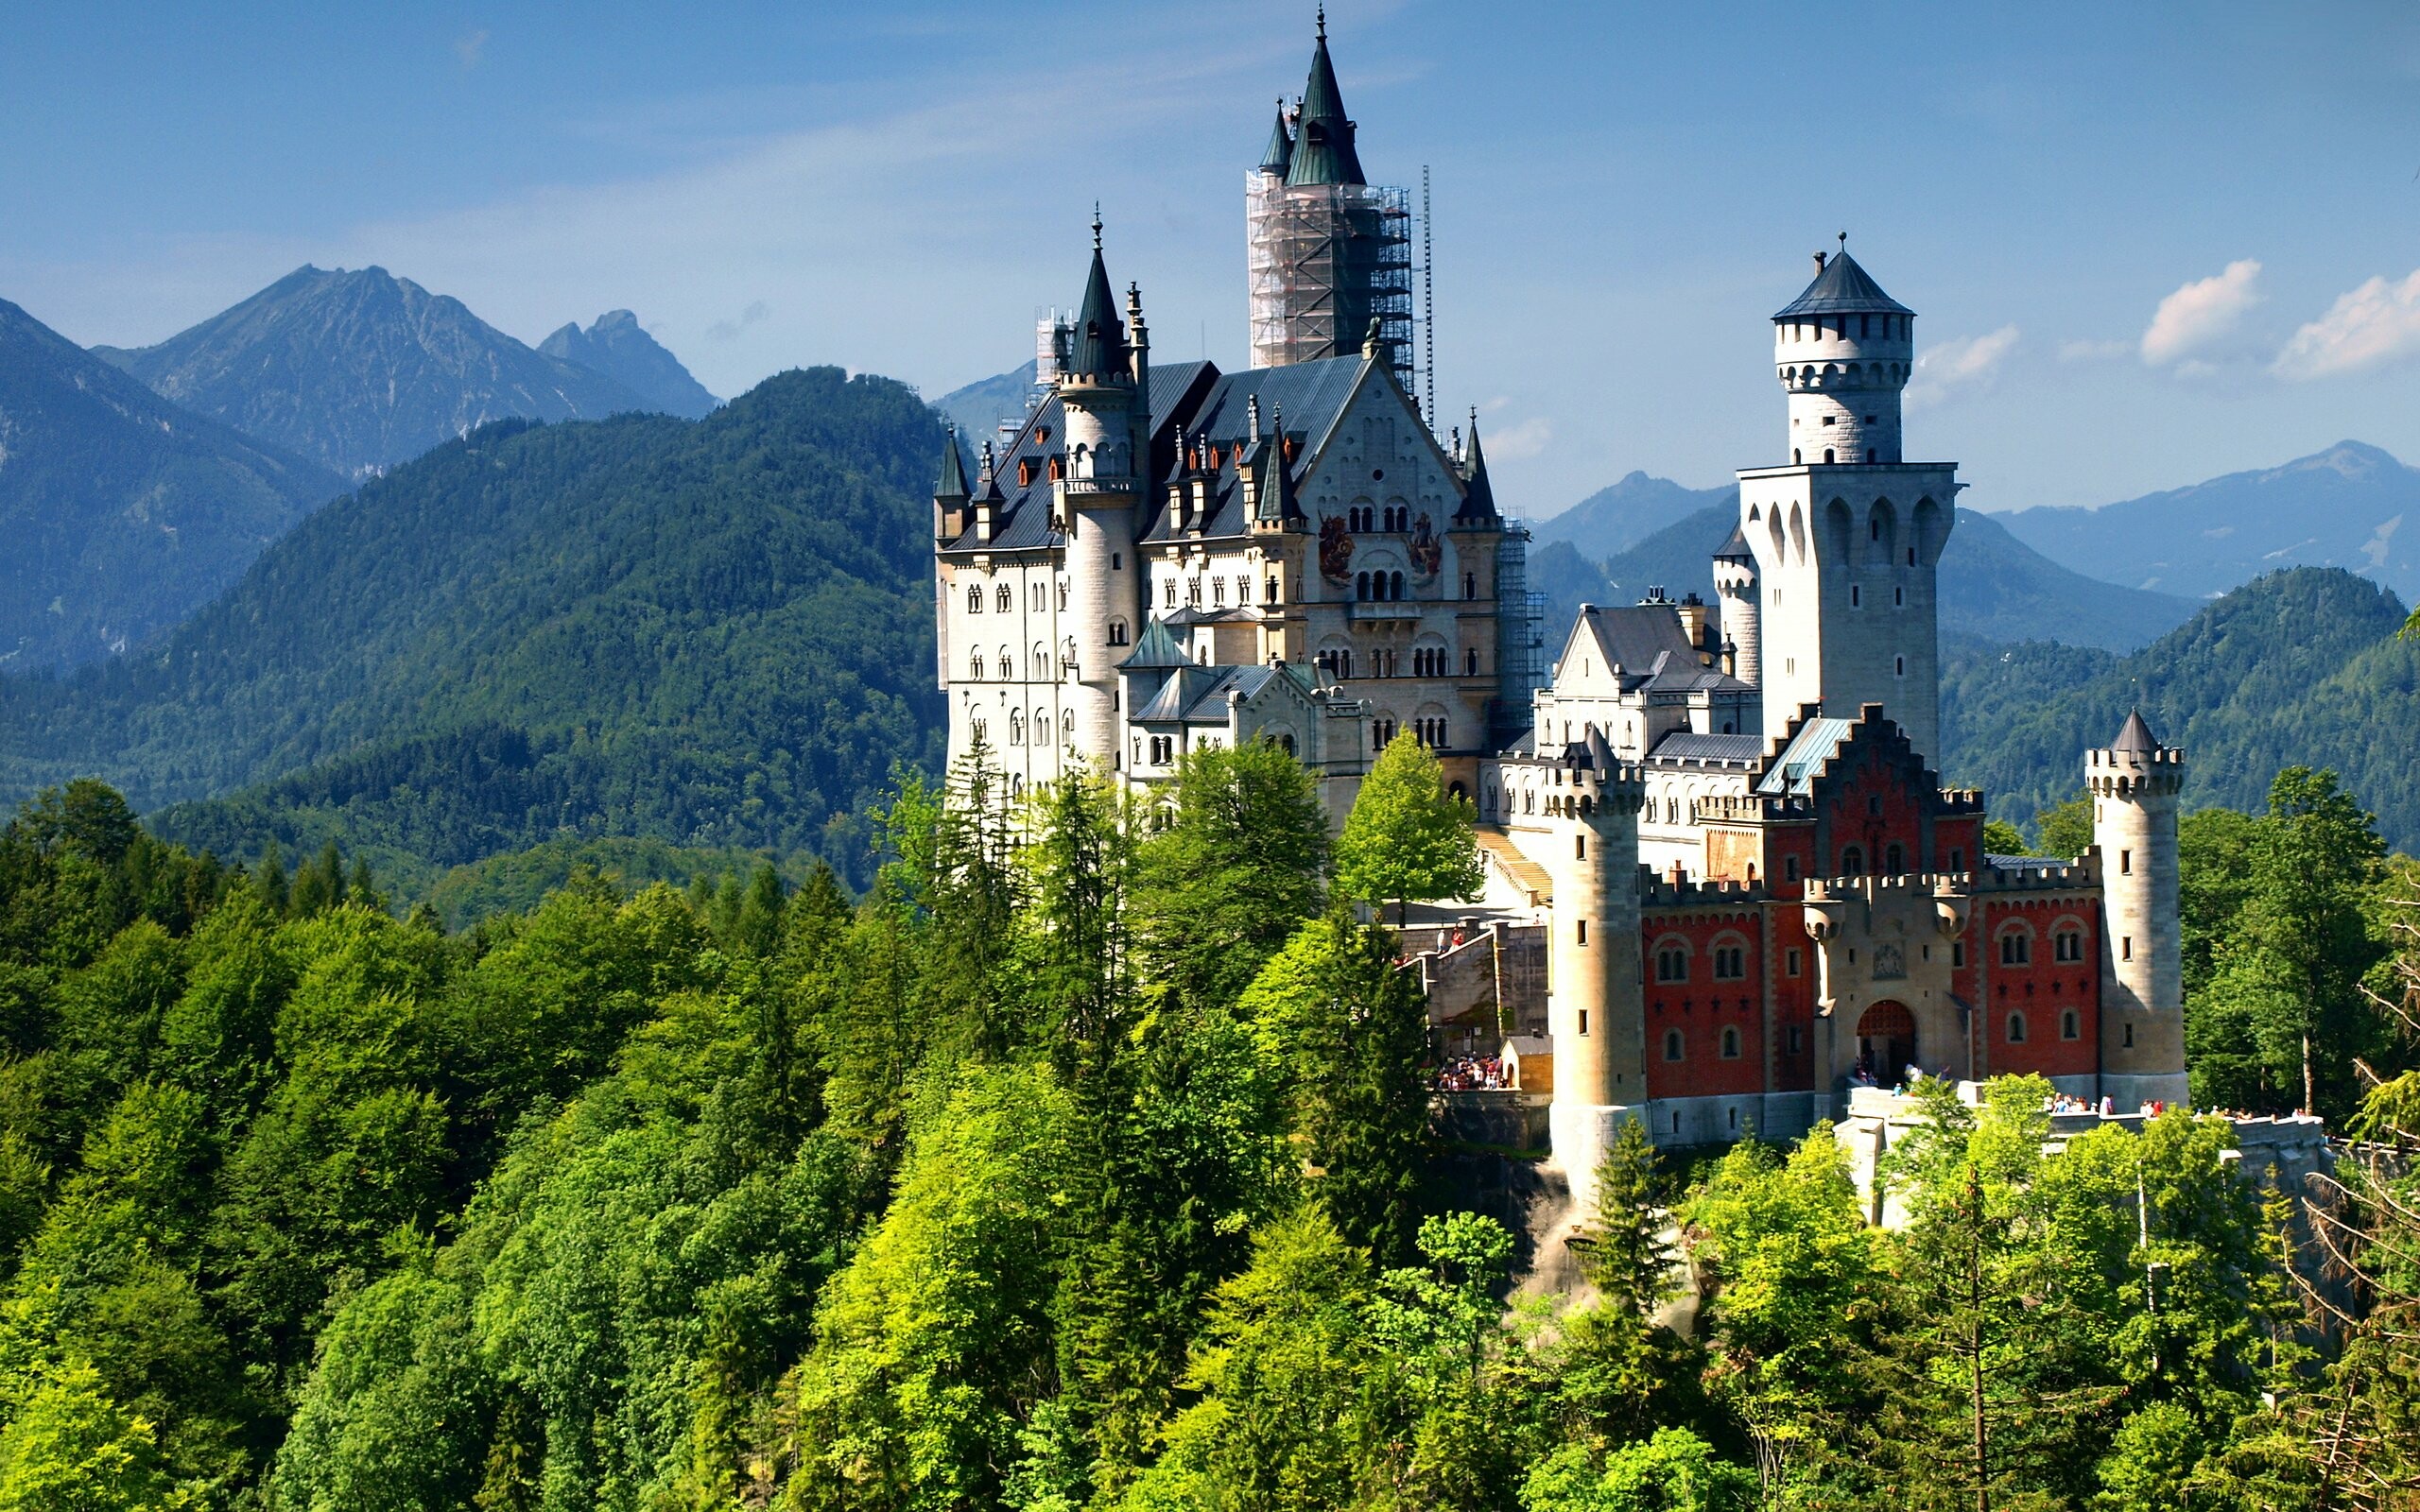 Neuschwanstein Castle: One of the most famous castles in the world, Alps, Bavaria. 2560x1600 HD Wallpaper.